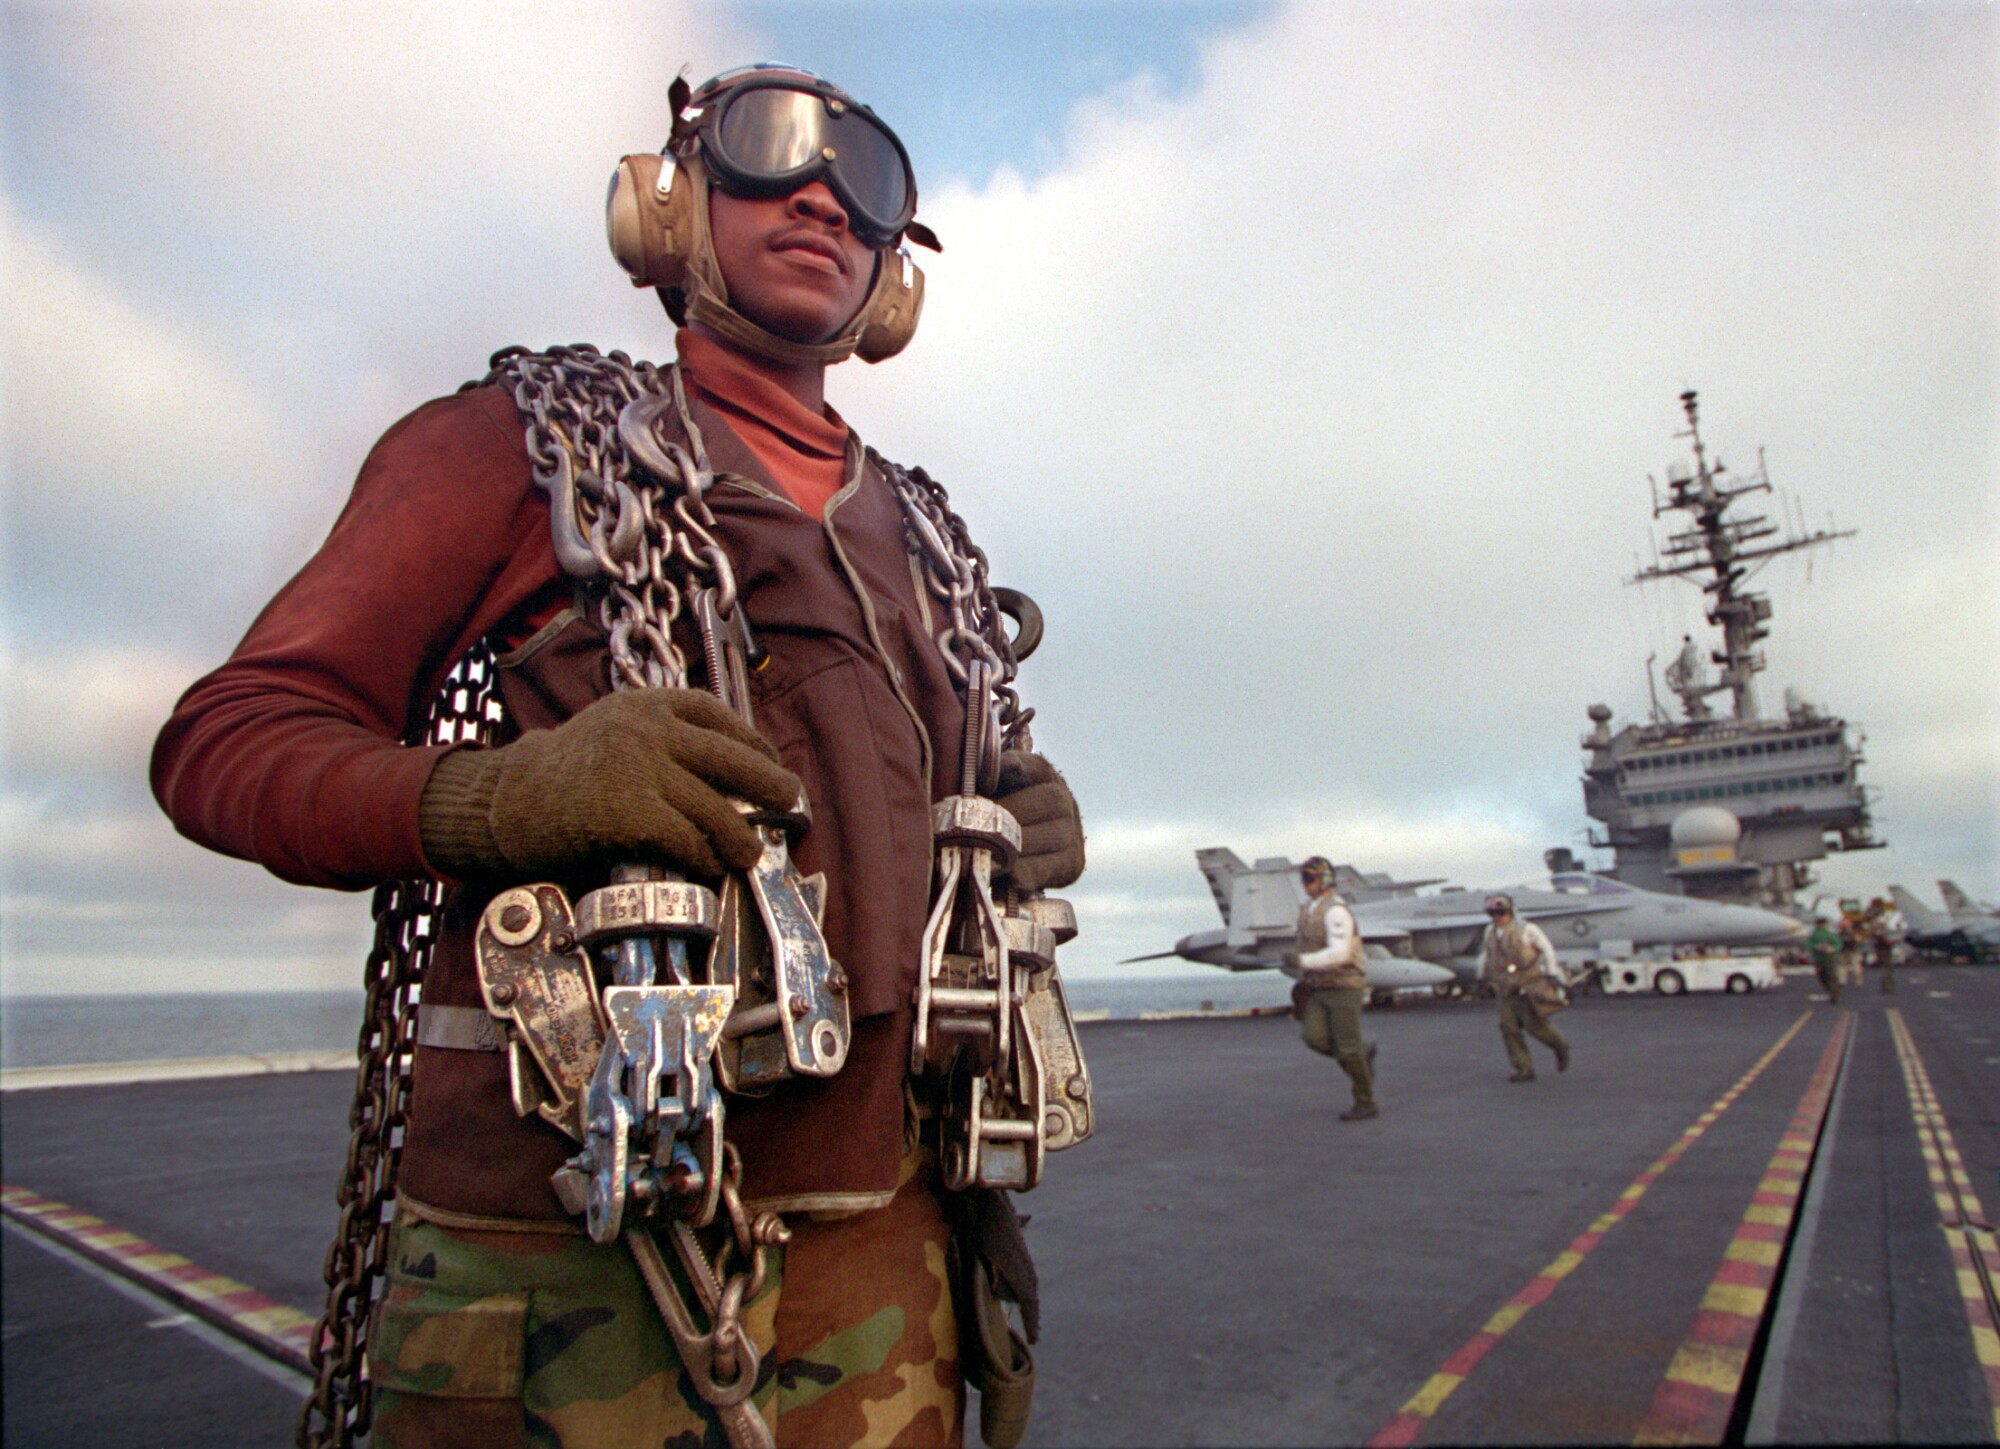 Airman Shawn Henderson waits to chain down an incoming fighter plane on the deck of the Kitty Hawk